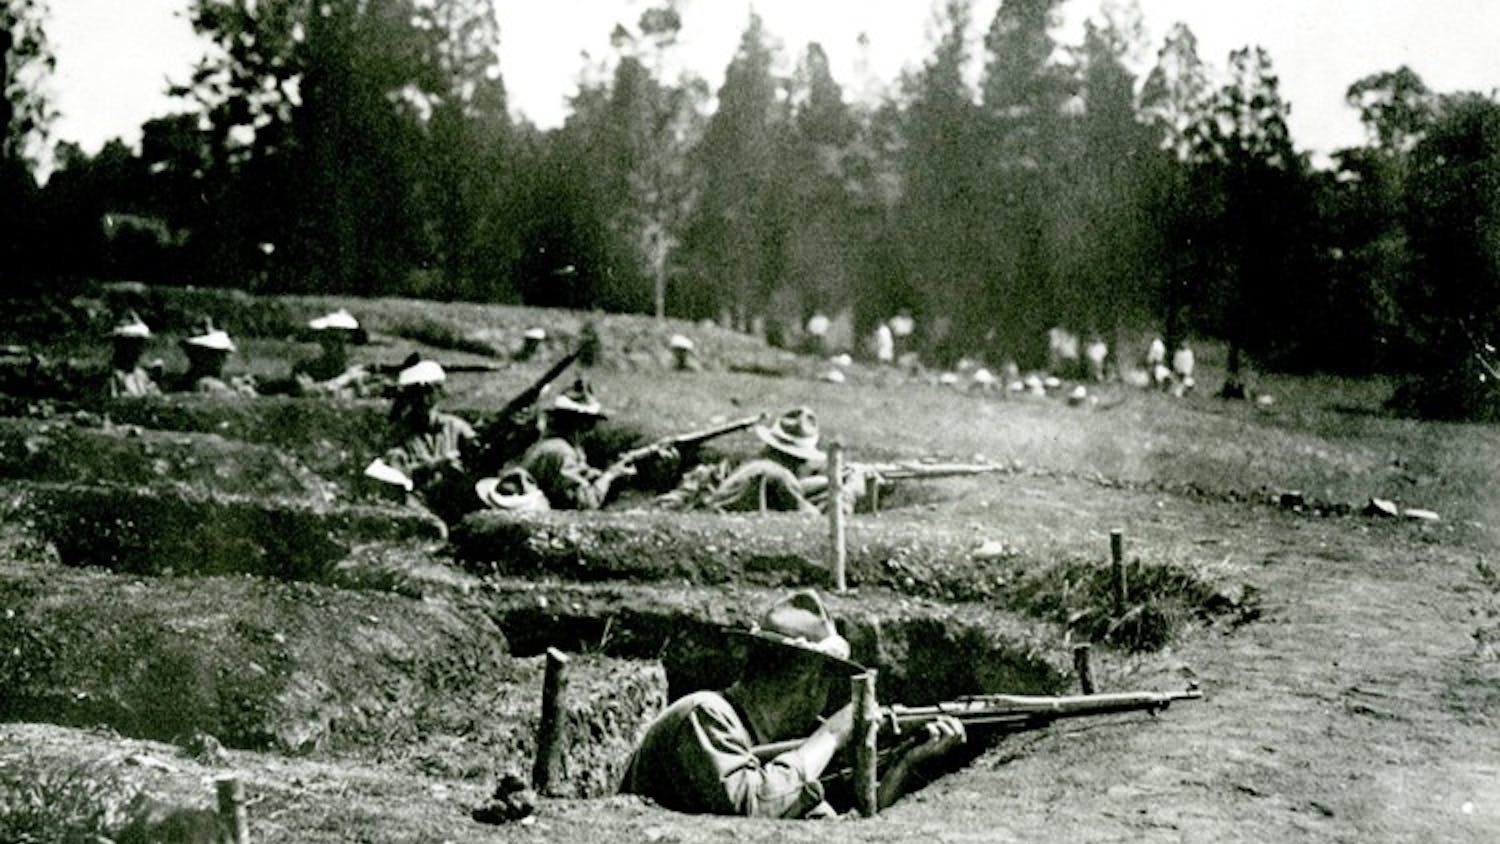 DIGGING DEEP â€” The Gas and Flame Regiment, also known as the â€œHell Fire Battalion,â€ was trained in trench warfare and chemical weapons. The regiment fought off German attacks in France.